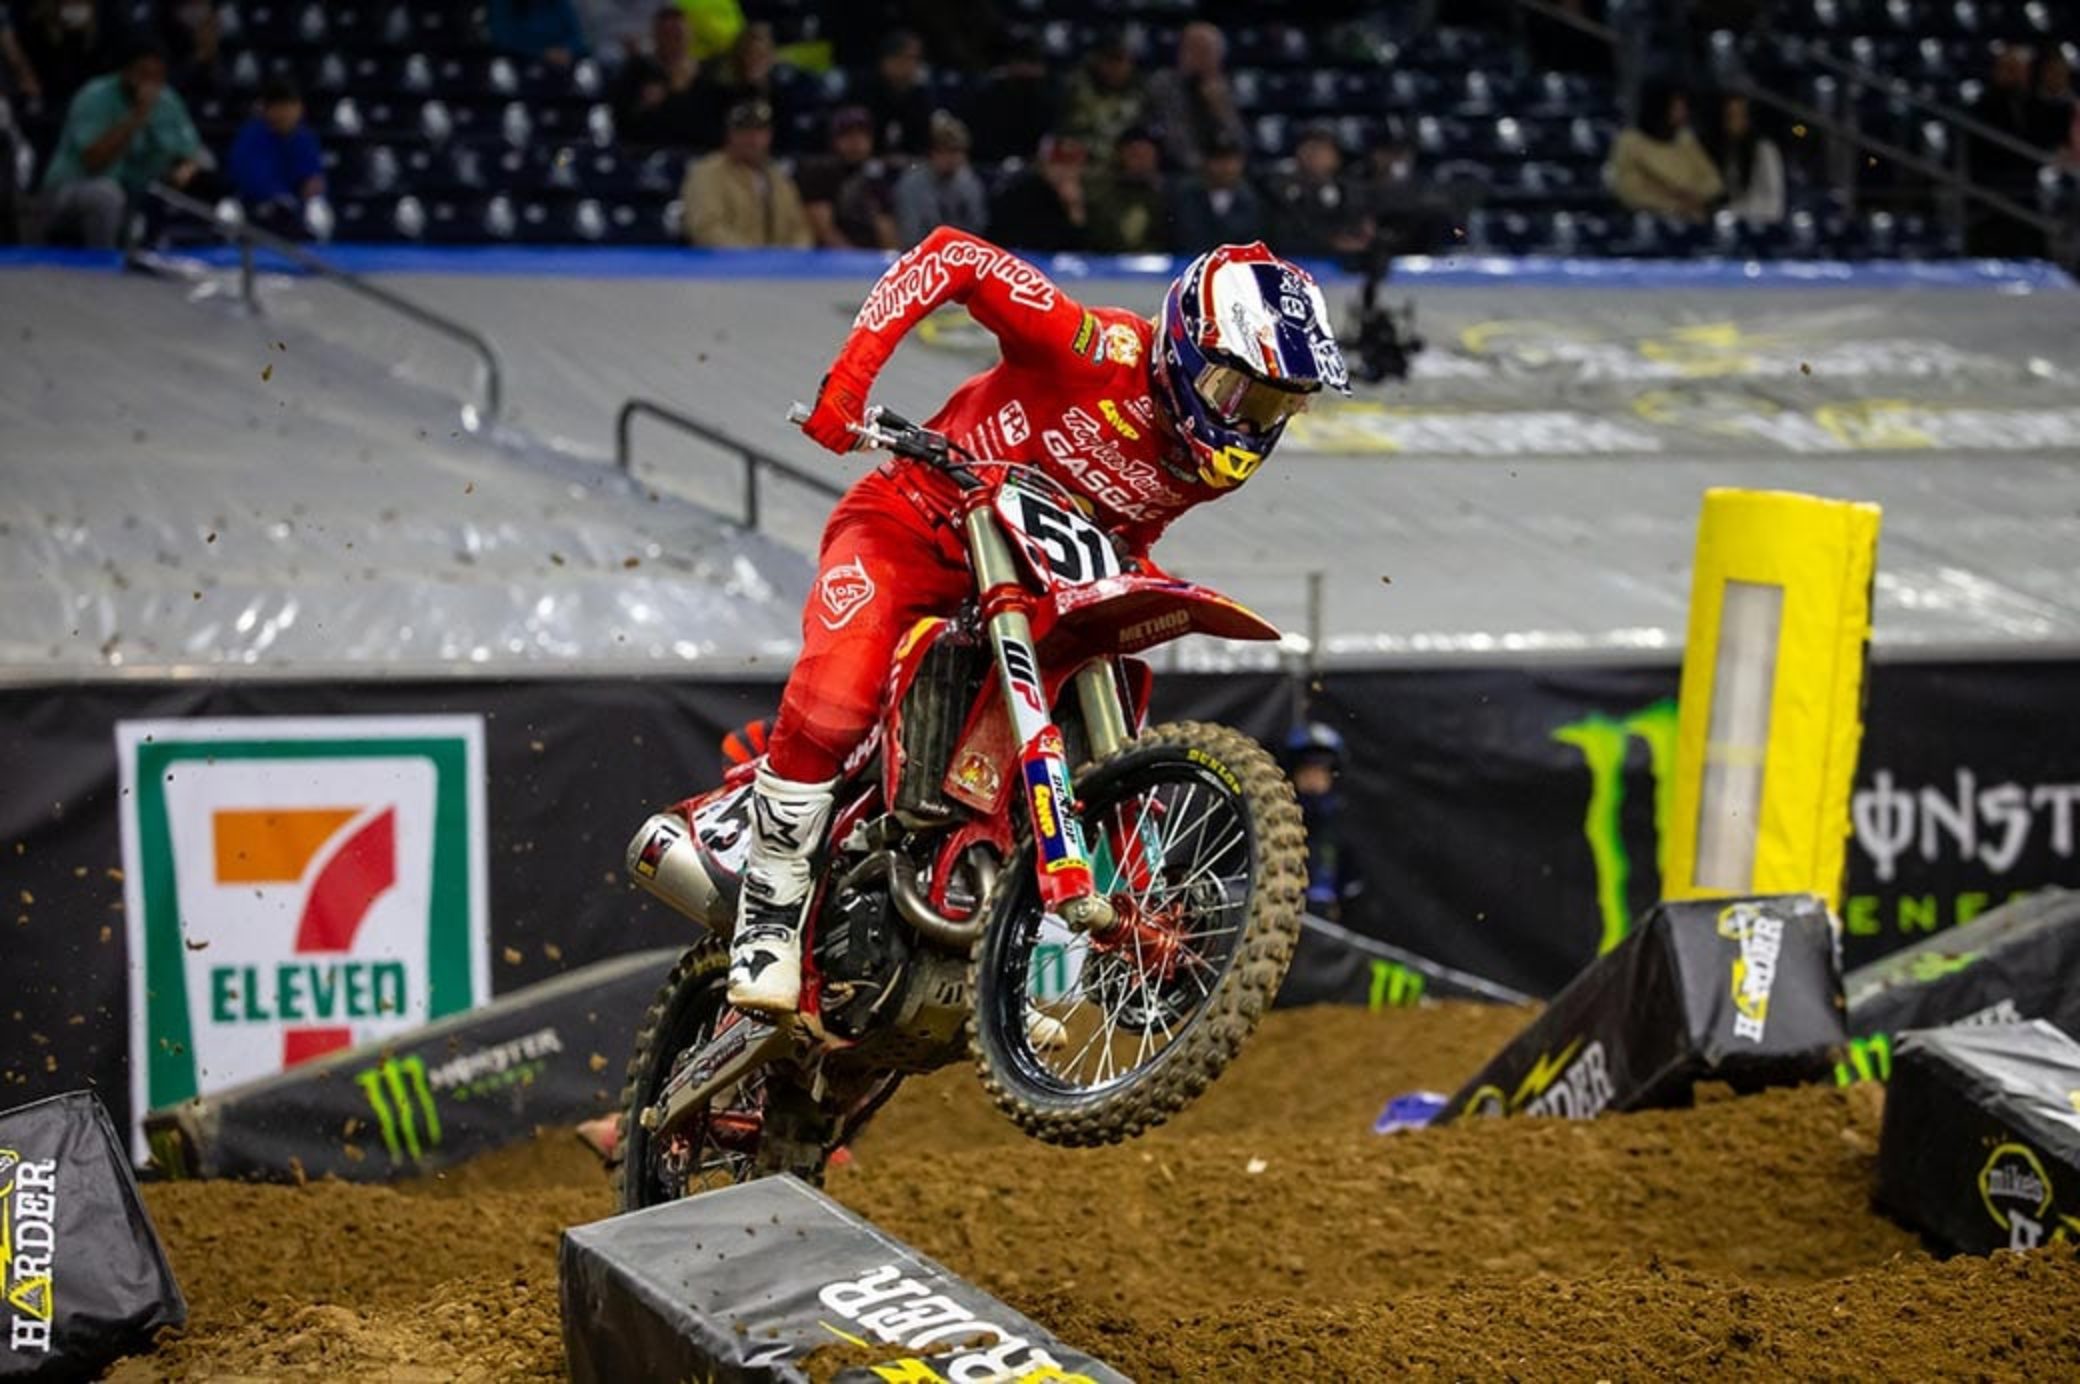 Houston 1 Report: Justin Barcia takes third-straight Supercross opening win